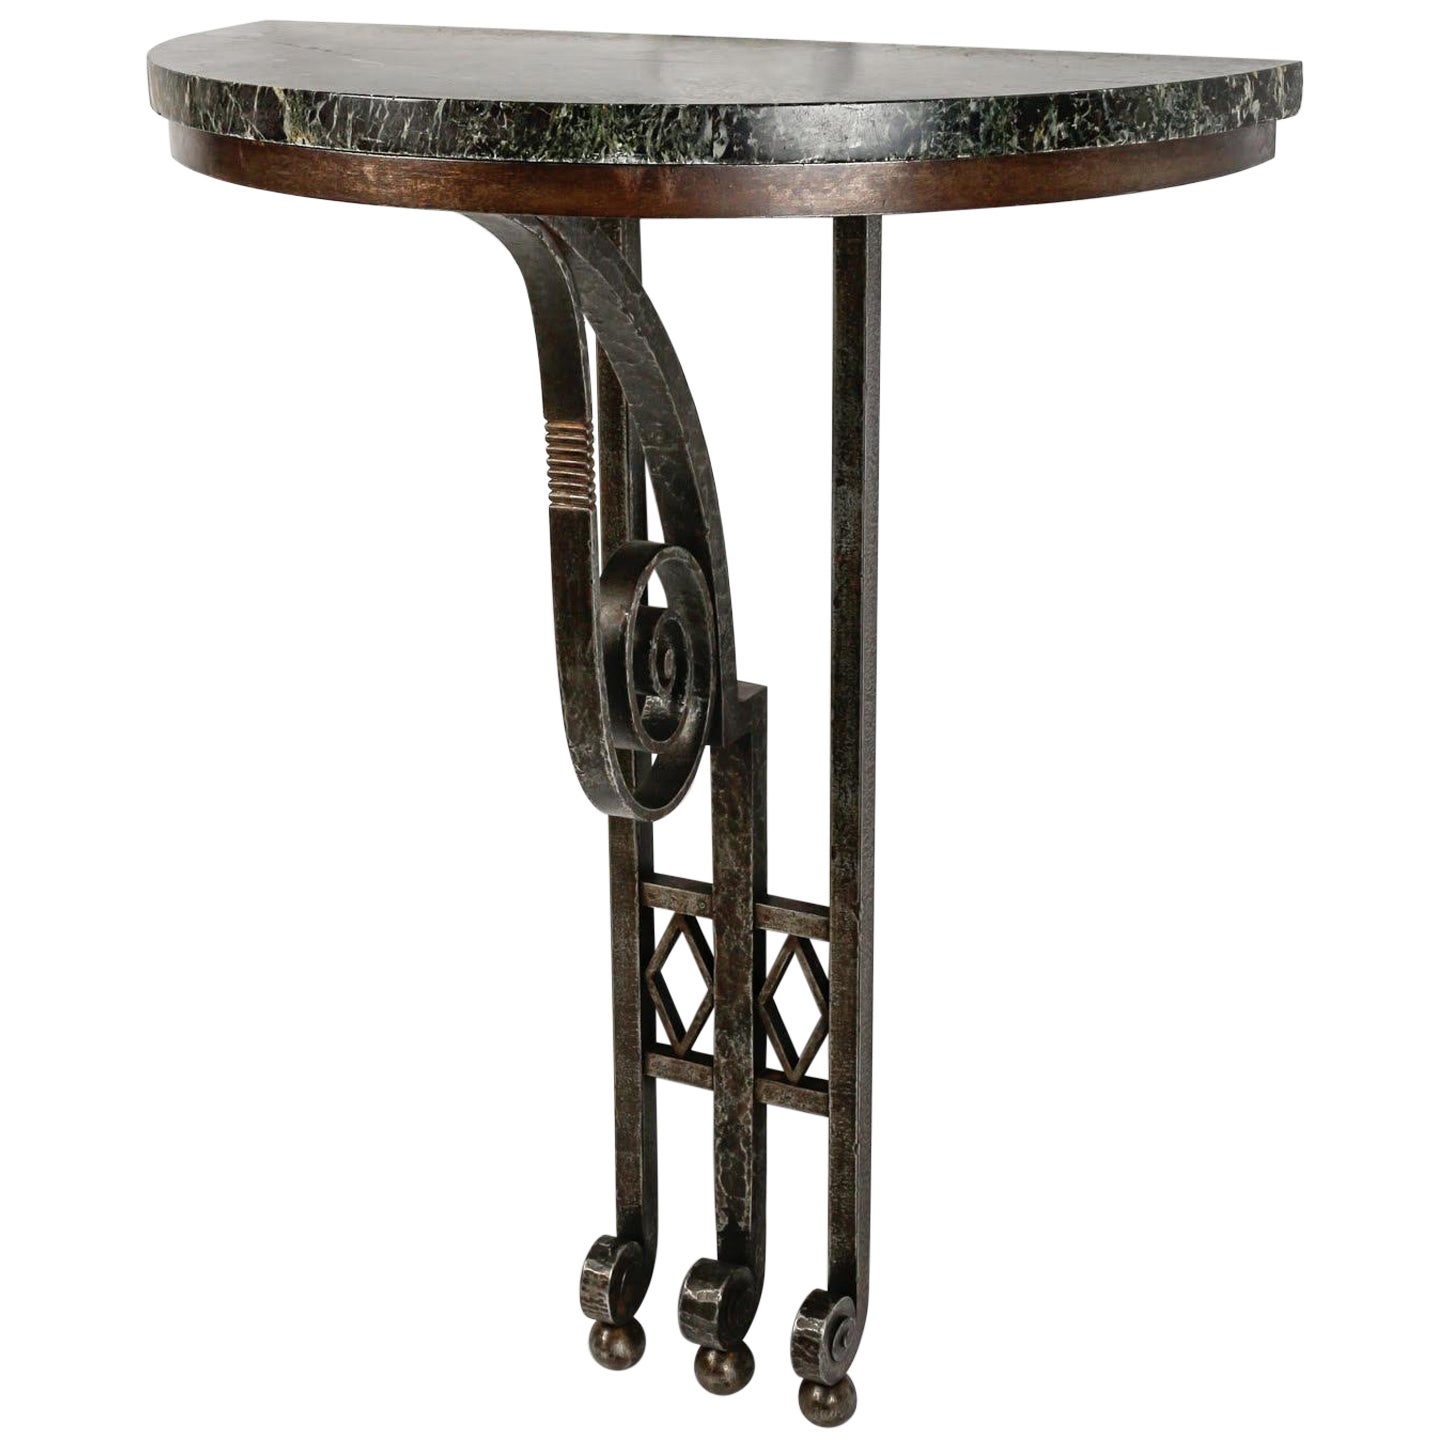 Art Deco Wrought Iron and Marble Console Table, Circa 1930.